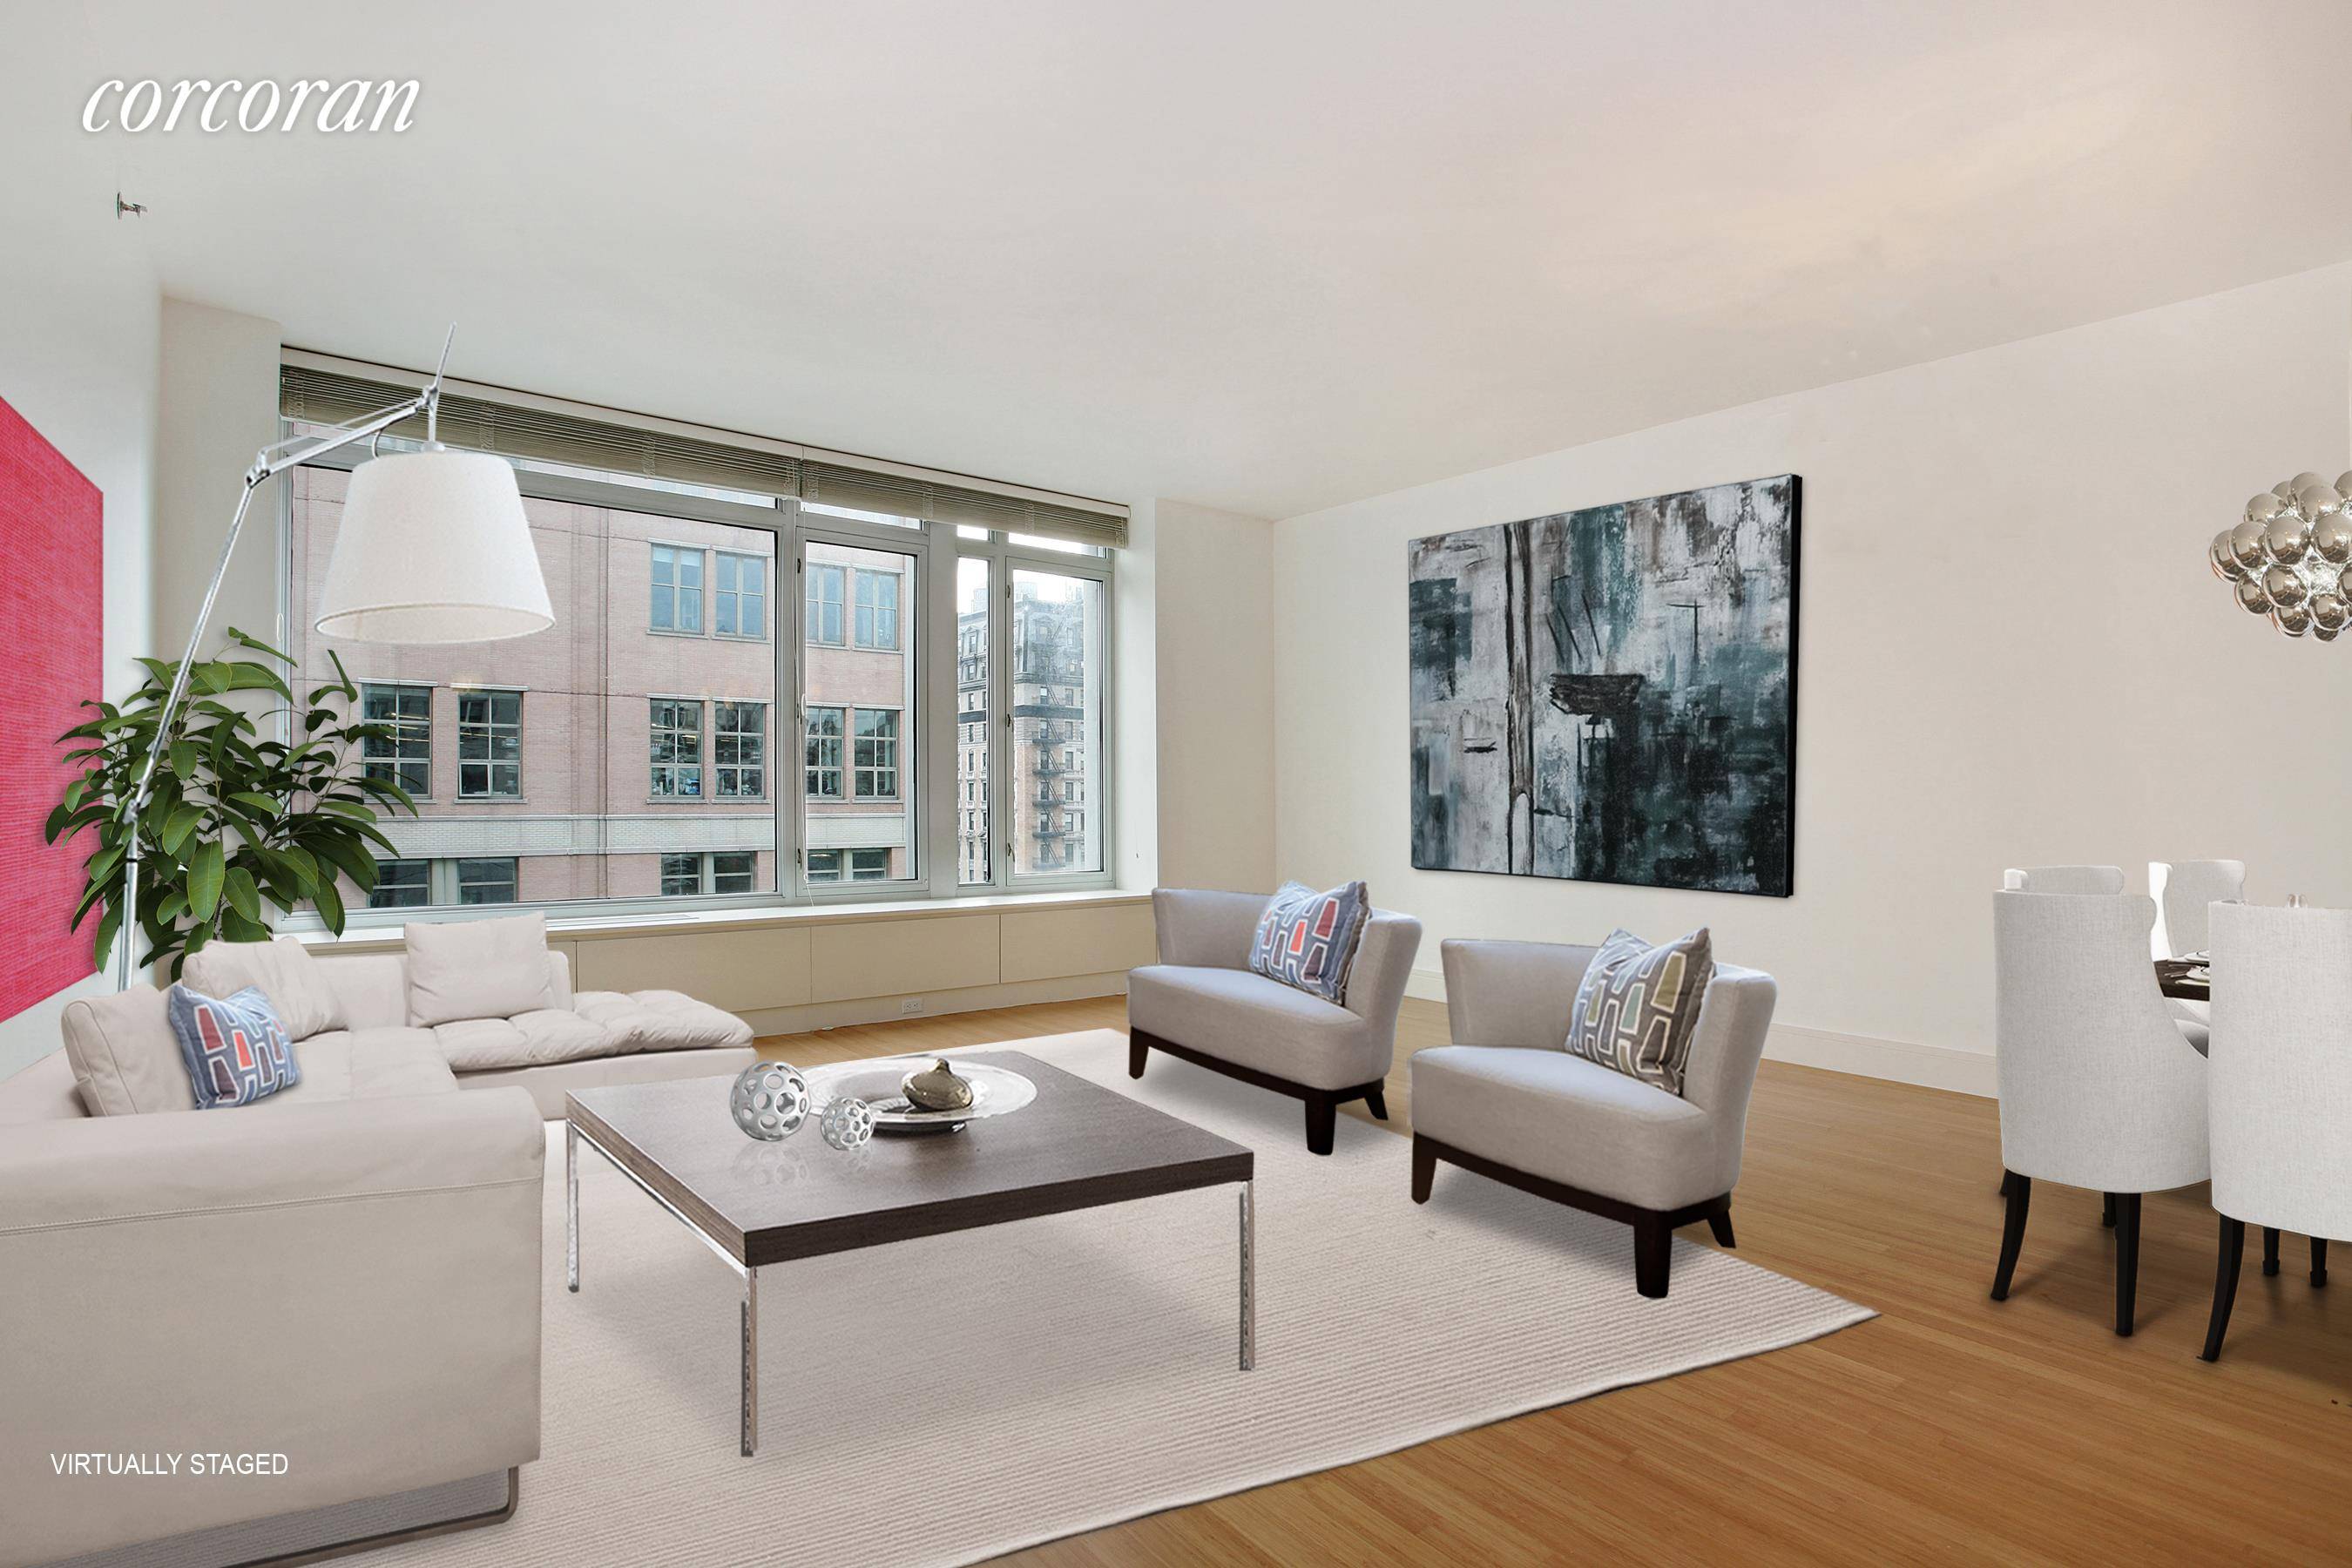 NO FEE ! Designed by Platt, Byard, Dovell amp ; White, this expansive 2 bedroom, 2 bath condominium is a modern masterpiece set in the Upper West Side's most vibrant ...